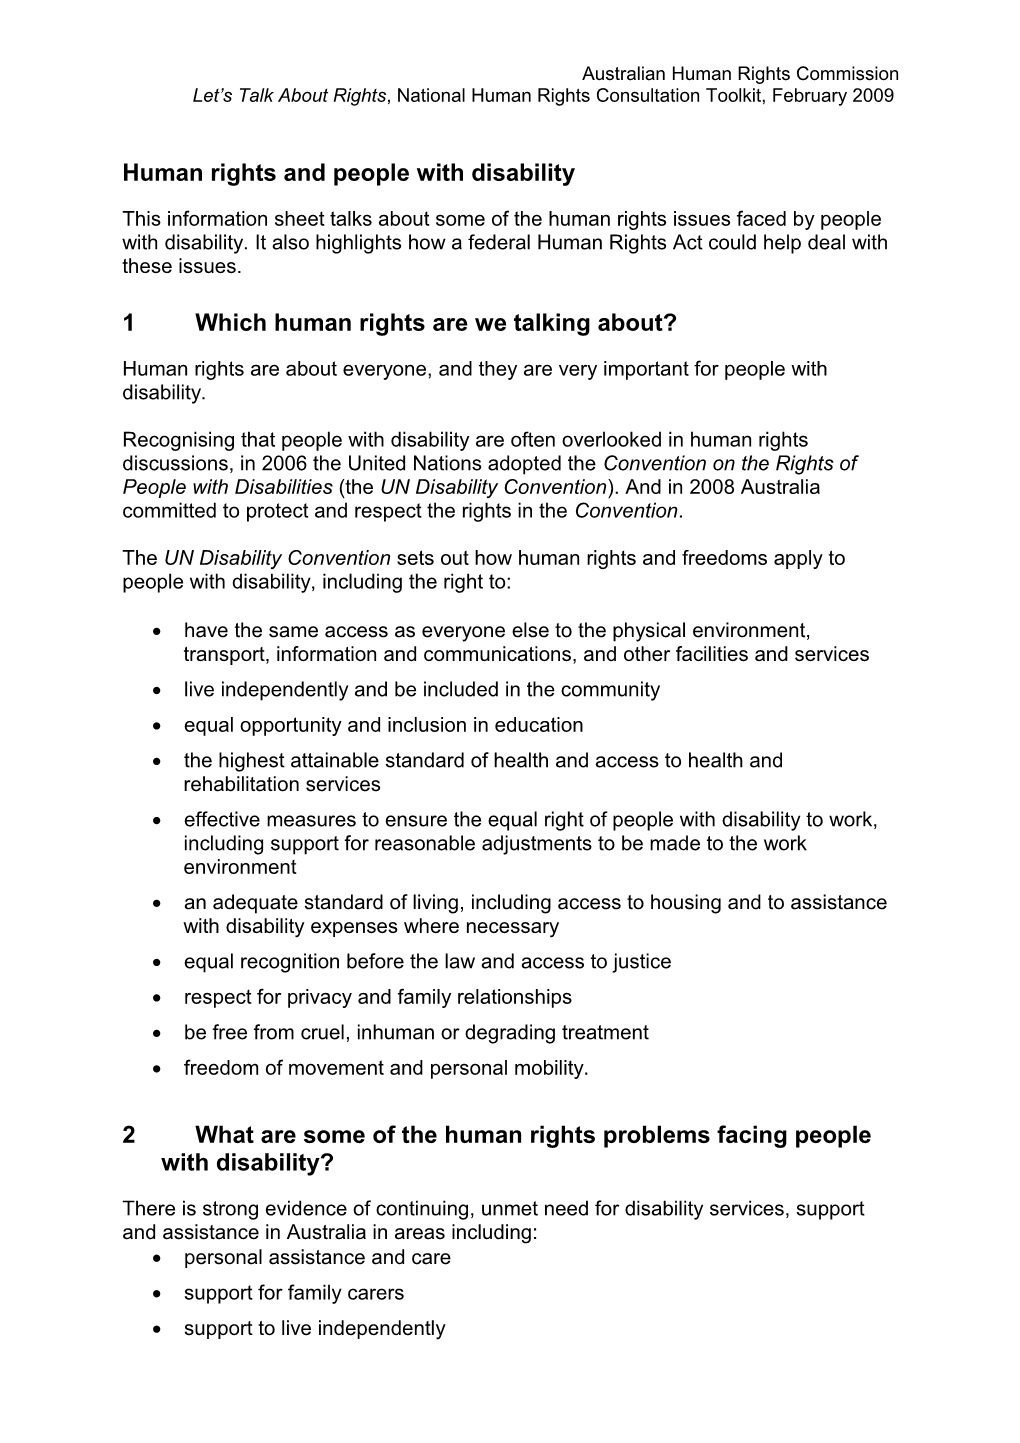 Children and Young People and a Human Rights Act